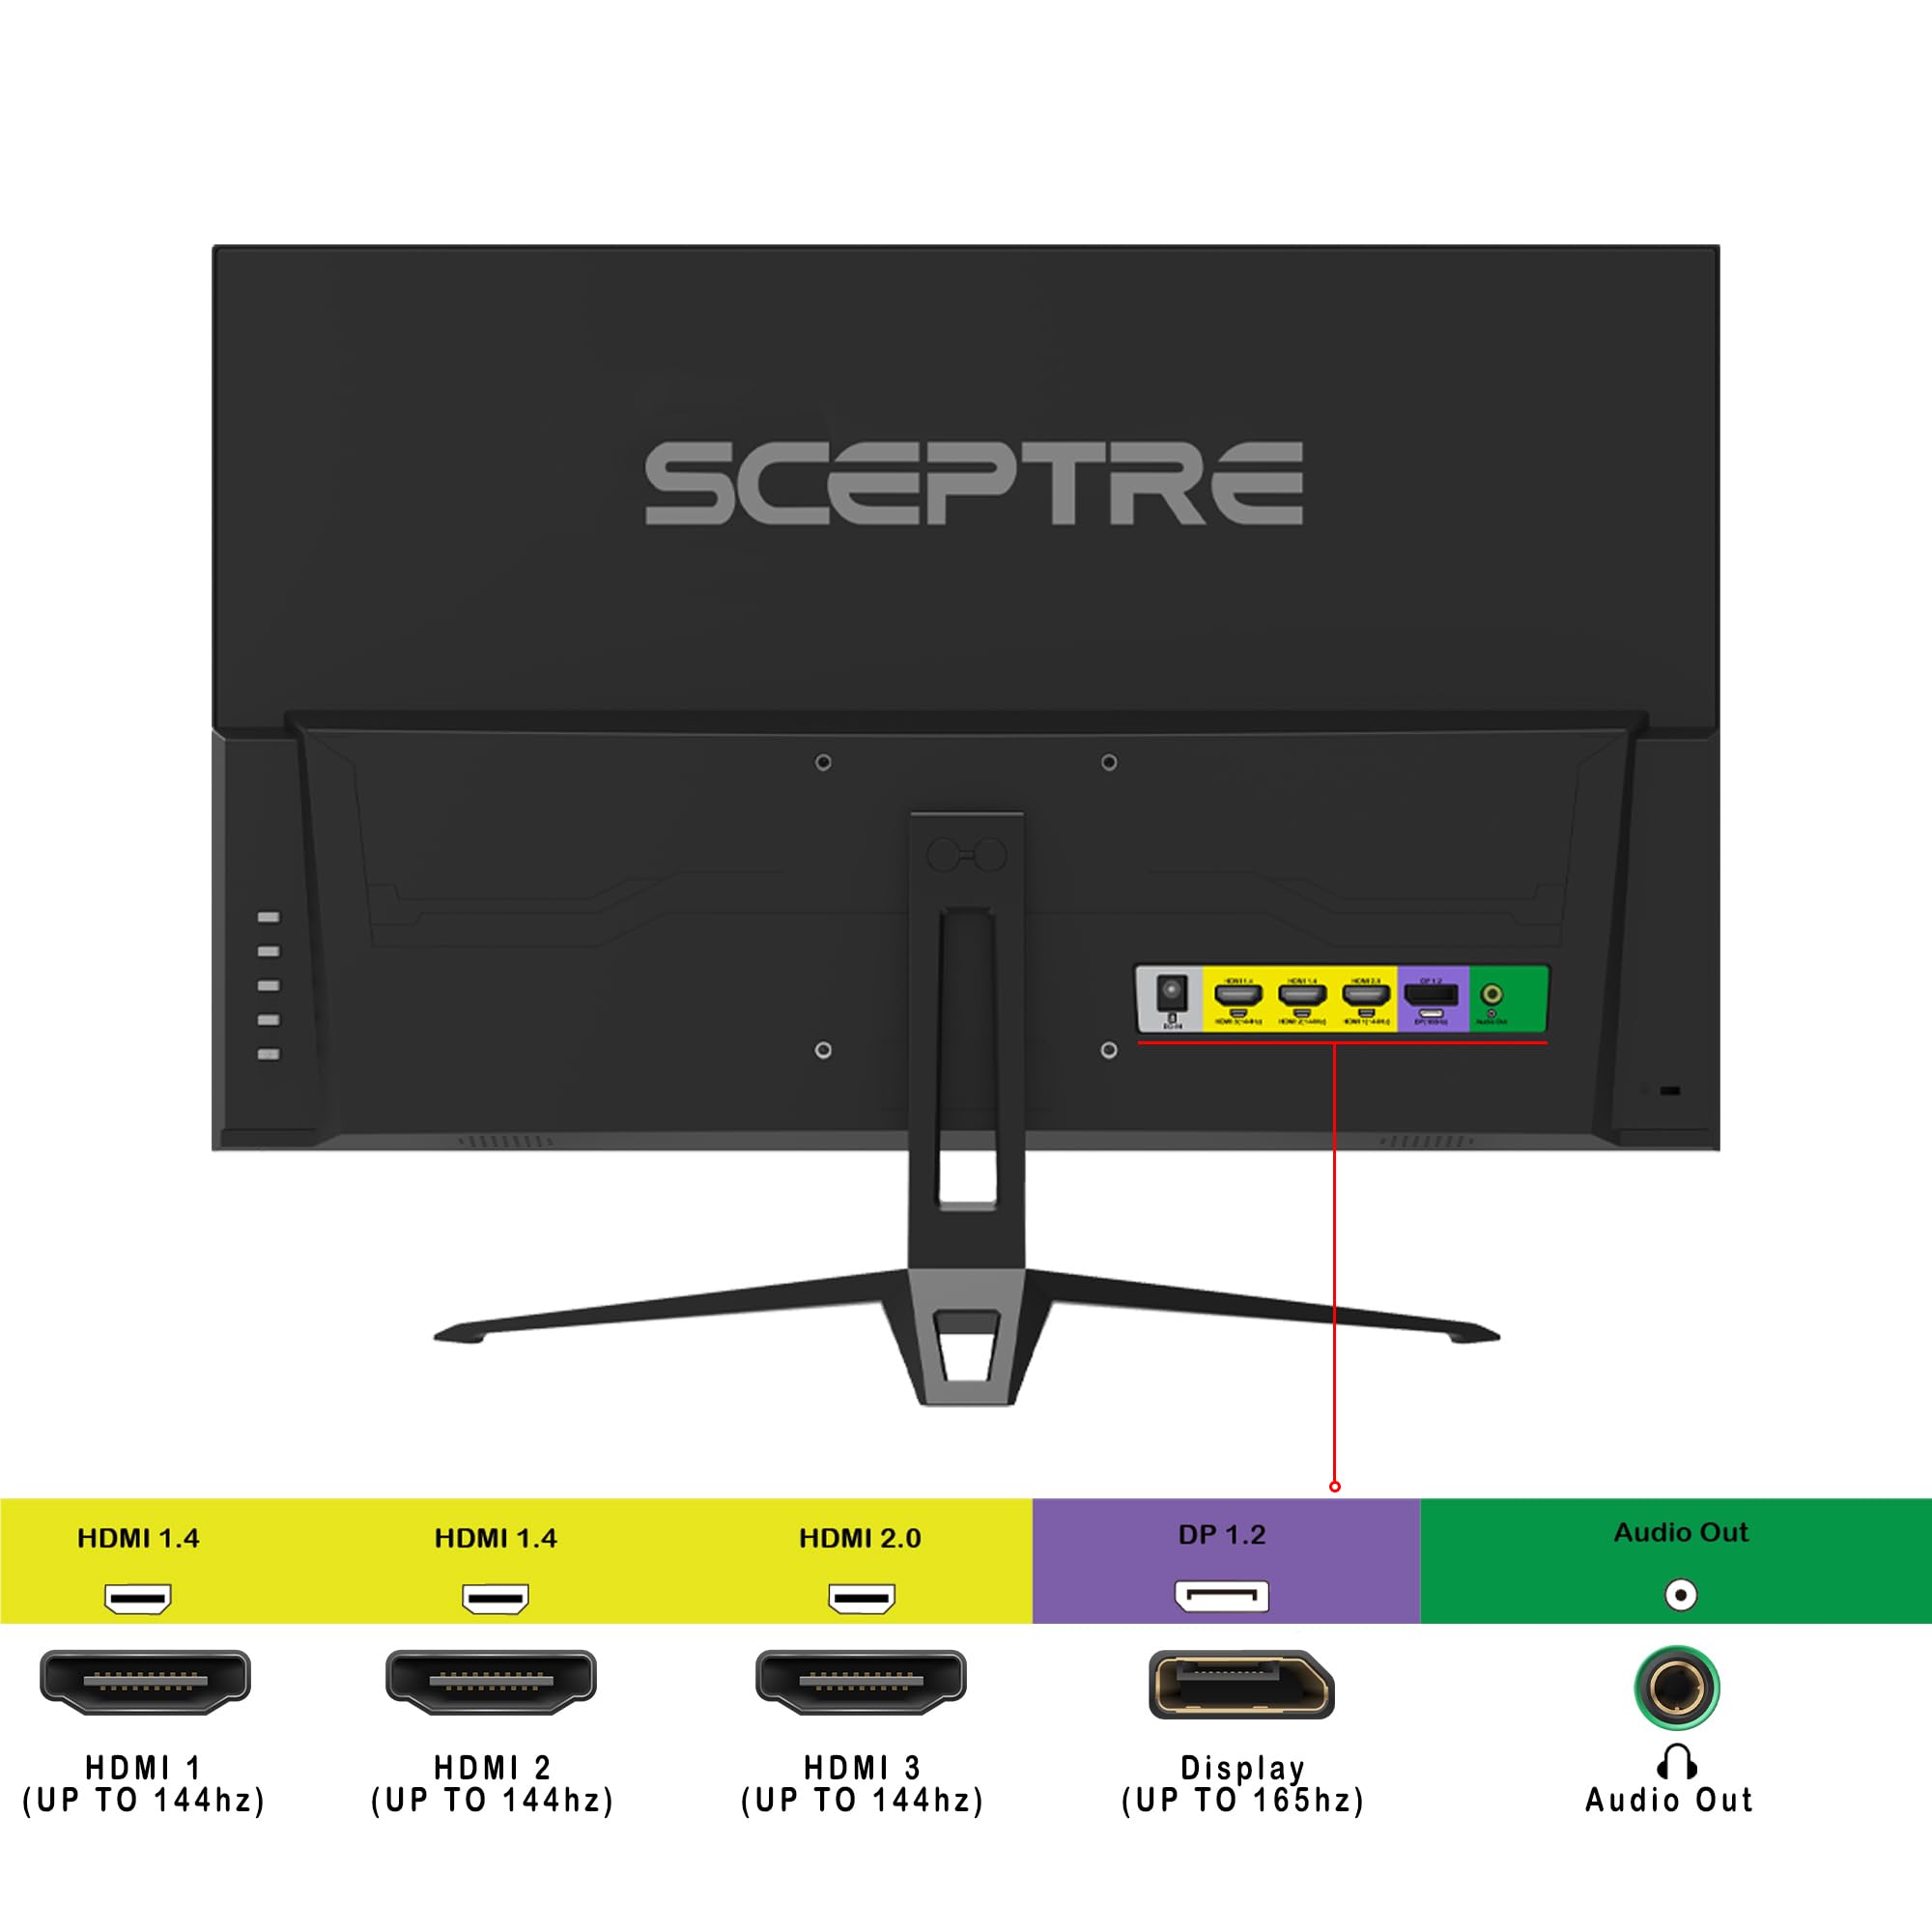 Sceptre 27-inch IPS Gaming Monitor up to 165Hz DisplayPort HDMI 300 Lux Build-in Speakers, Machine Black (E278B-FPT168)